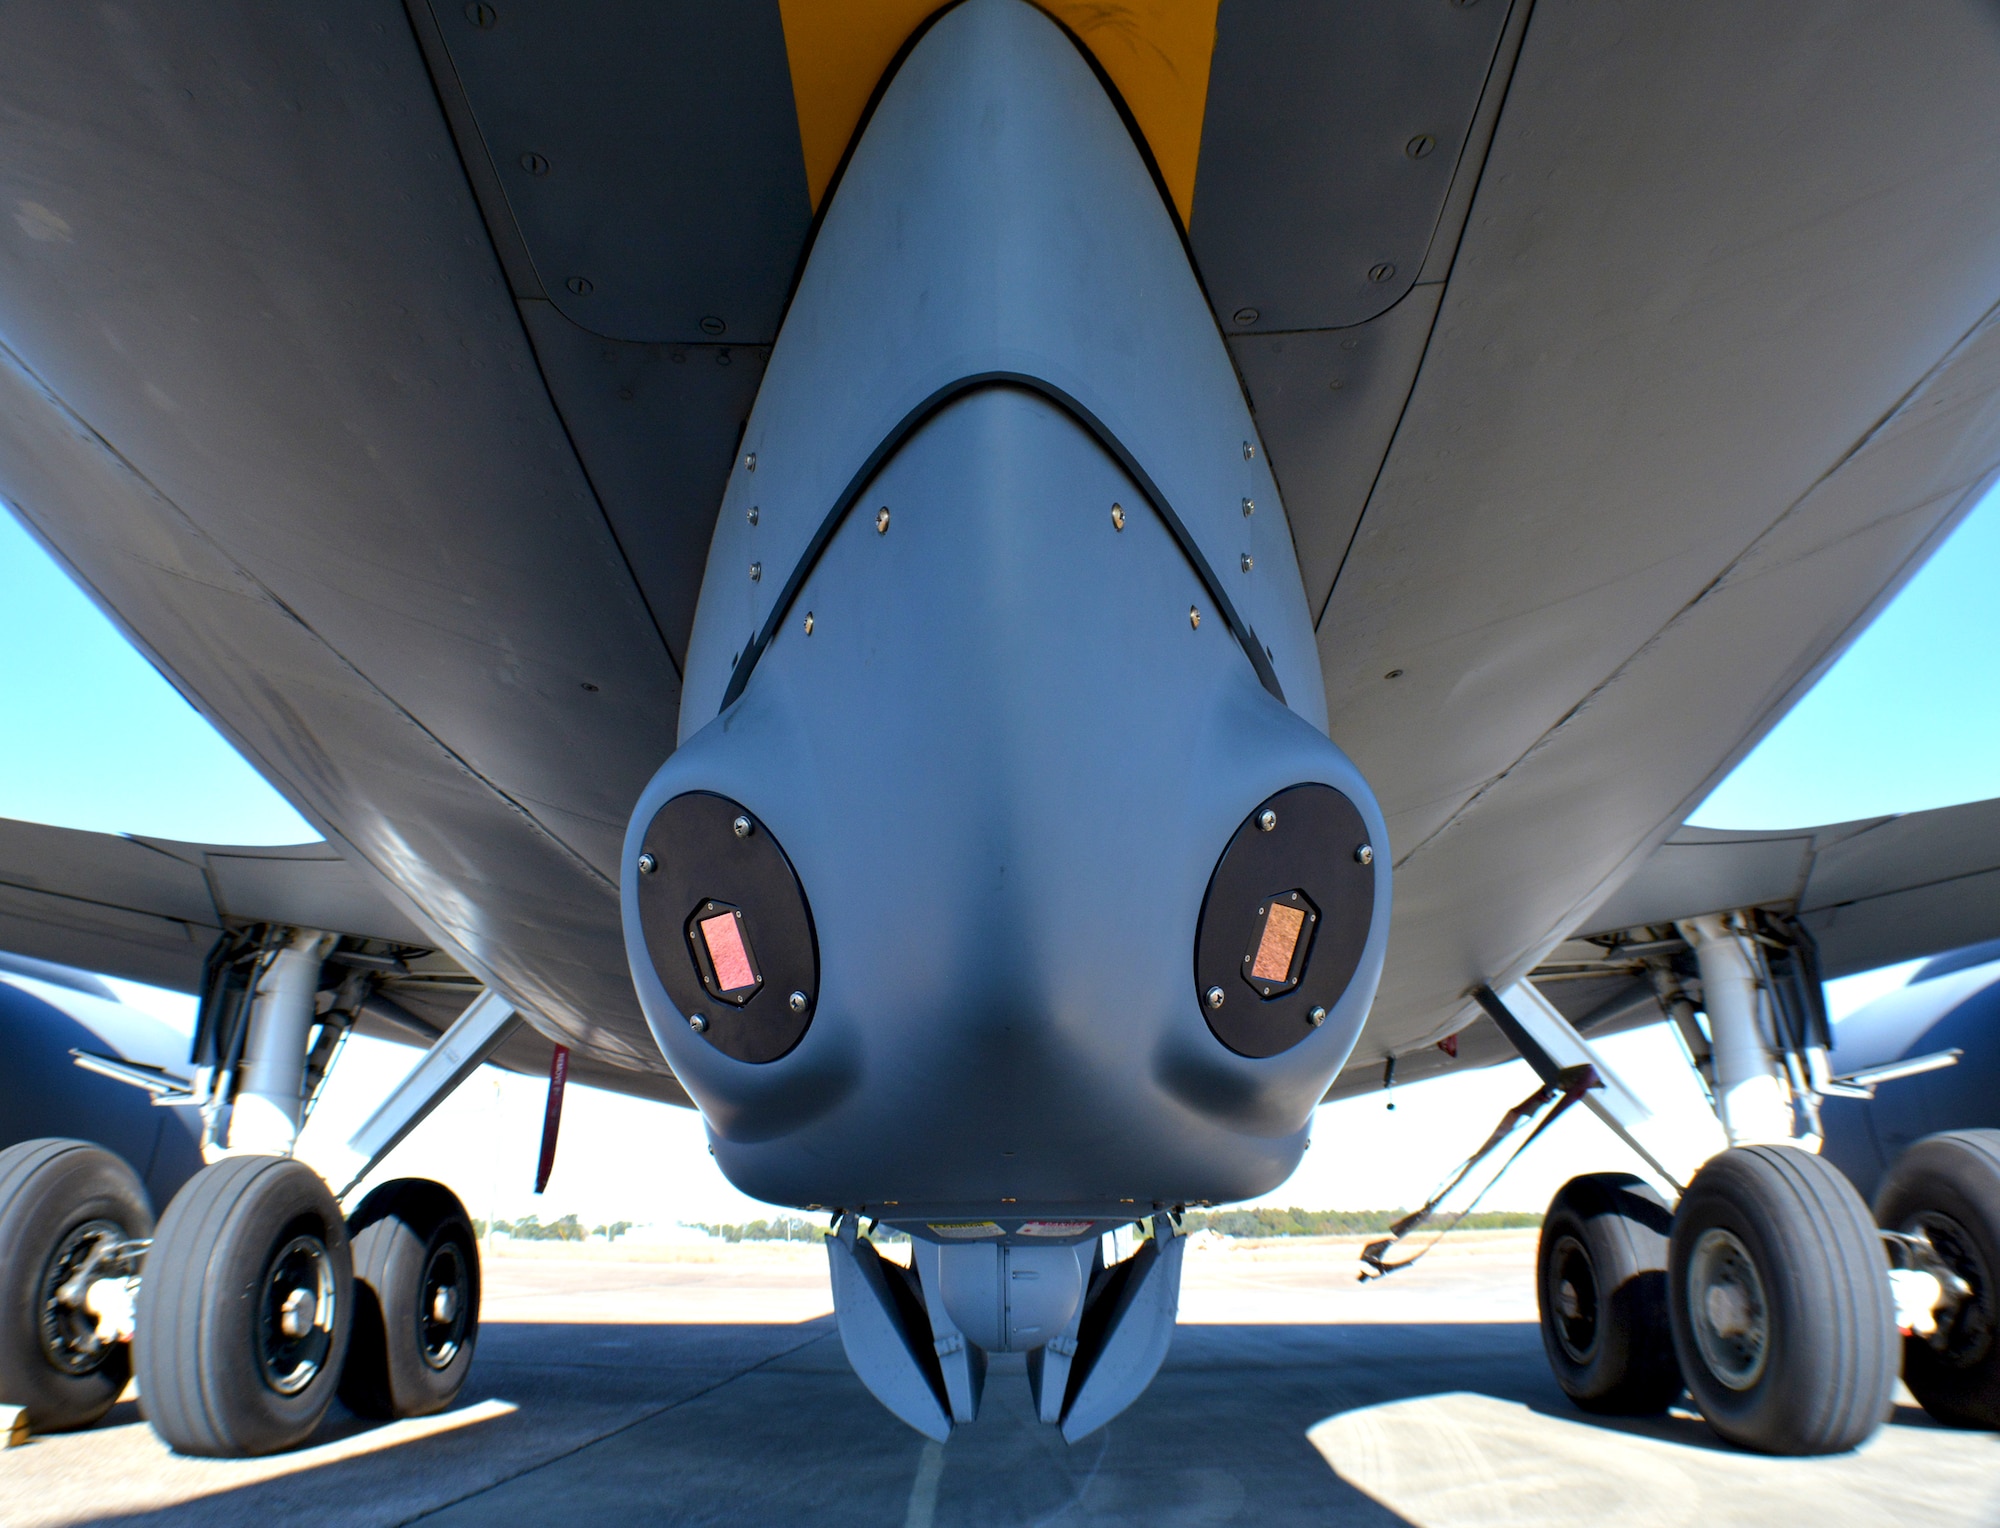 A Large Aircraft Infrared Countermeasures system modification pod is attached to the underside of a 507th Air Refueling Wing KC-135R Stratotanker from Tinker Air Force Base, Okla., while parked on the flightline at Eglin AFB, Fla., Nov. 28, 2017. The pod was designed to be installed or removed within approximately 10 minutes by aircraft maintenance crews. (U.S. Air Force photo/Tech. Sgt. Samantha Mathison)